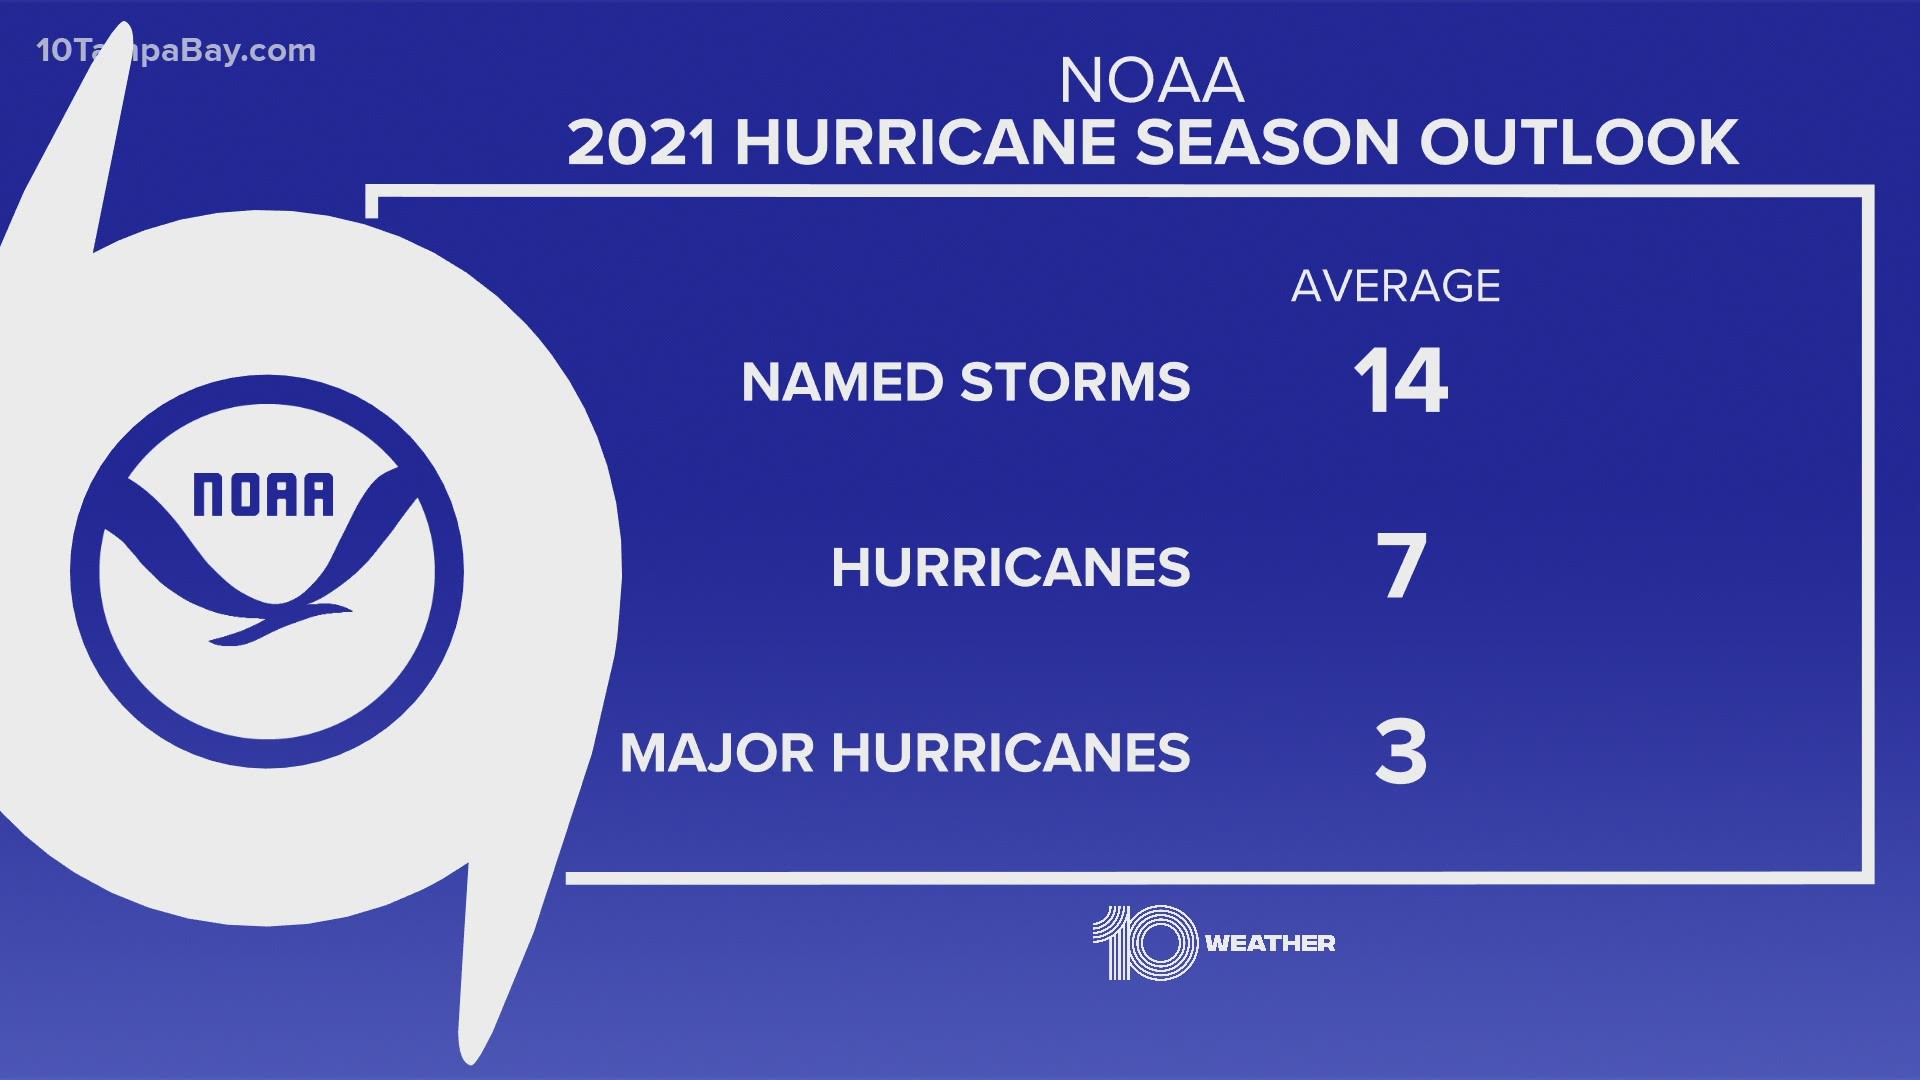 A normal season typically brings 14 named storms, seven hurricanes and three major hurricanes.